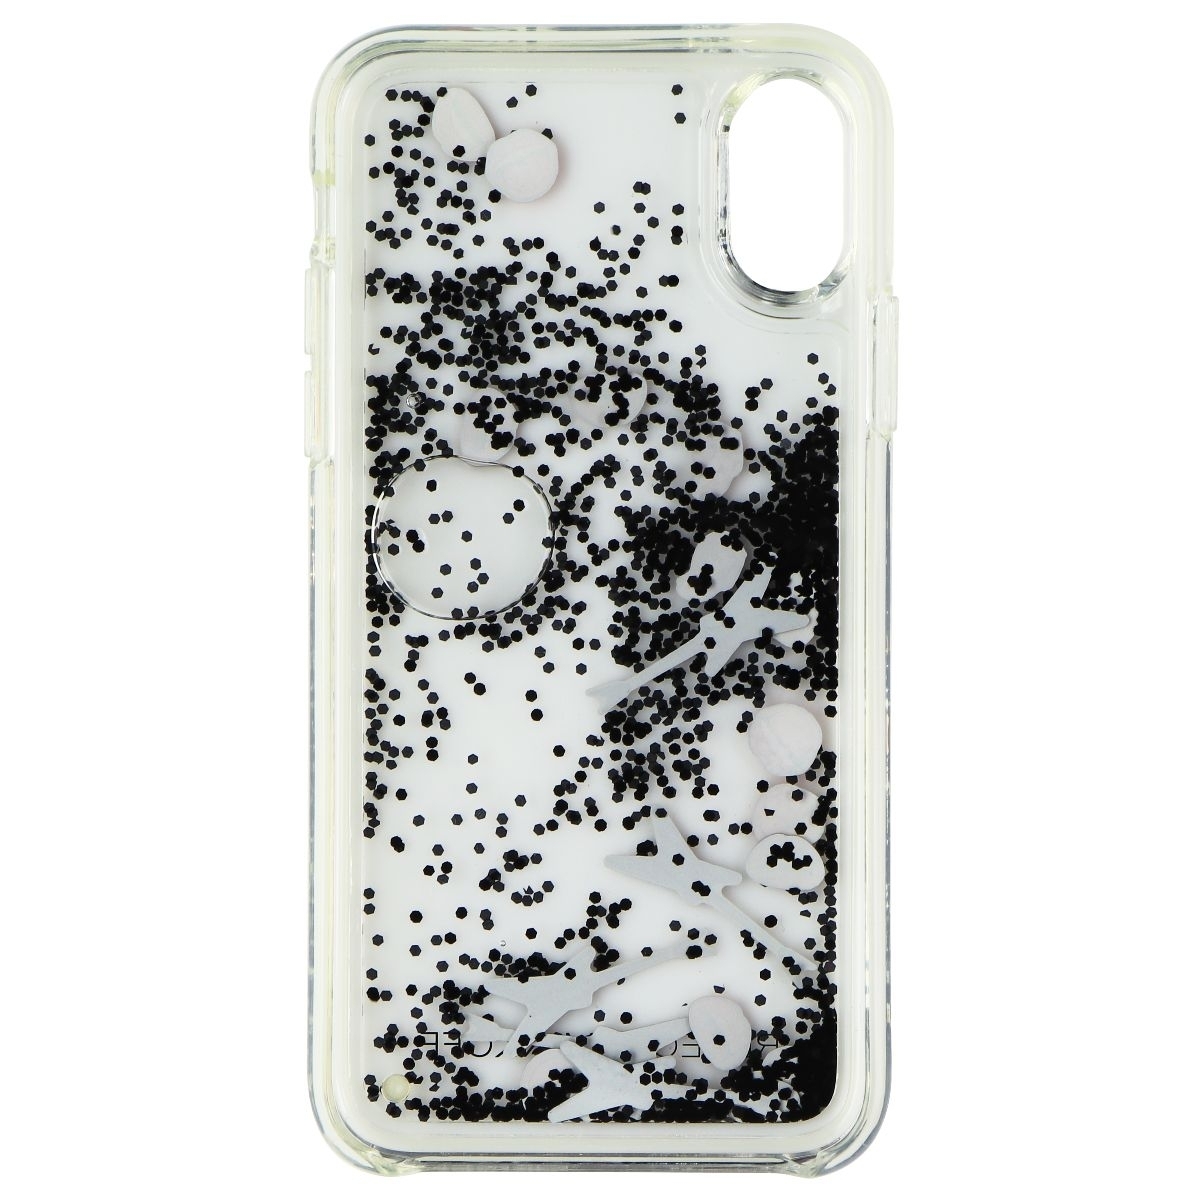 Rebecca Minkoff See Though Me Case For Apple IPhone Xs/X - Clear/Rockstar (Refurbished)